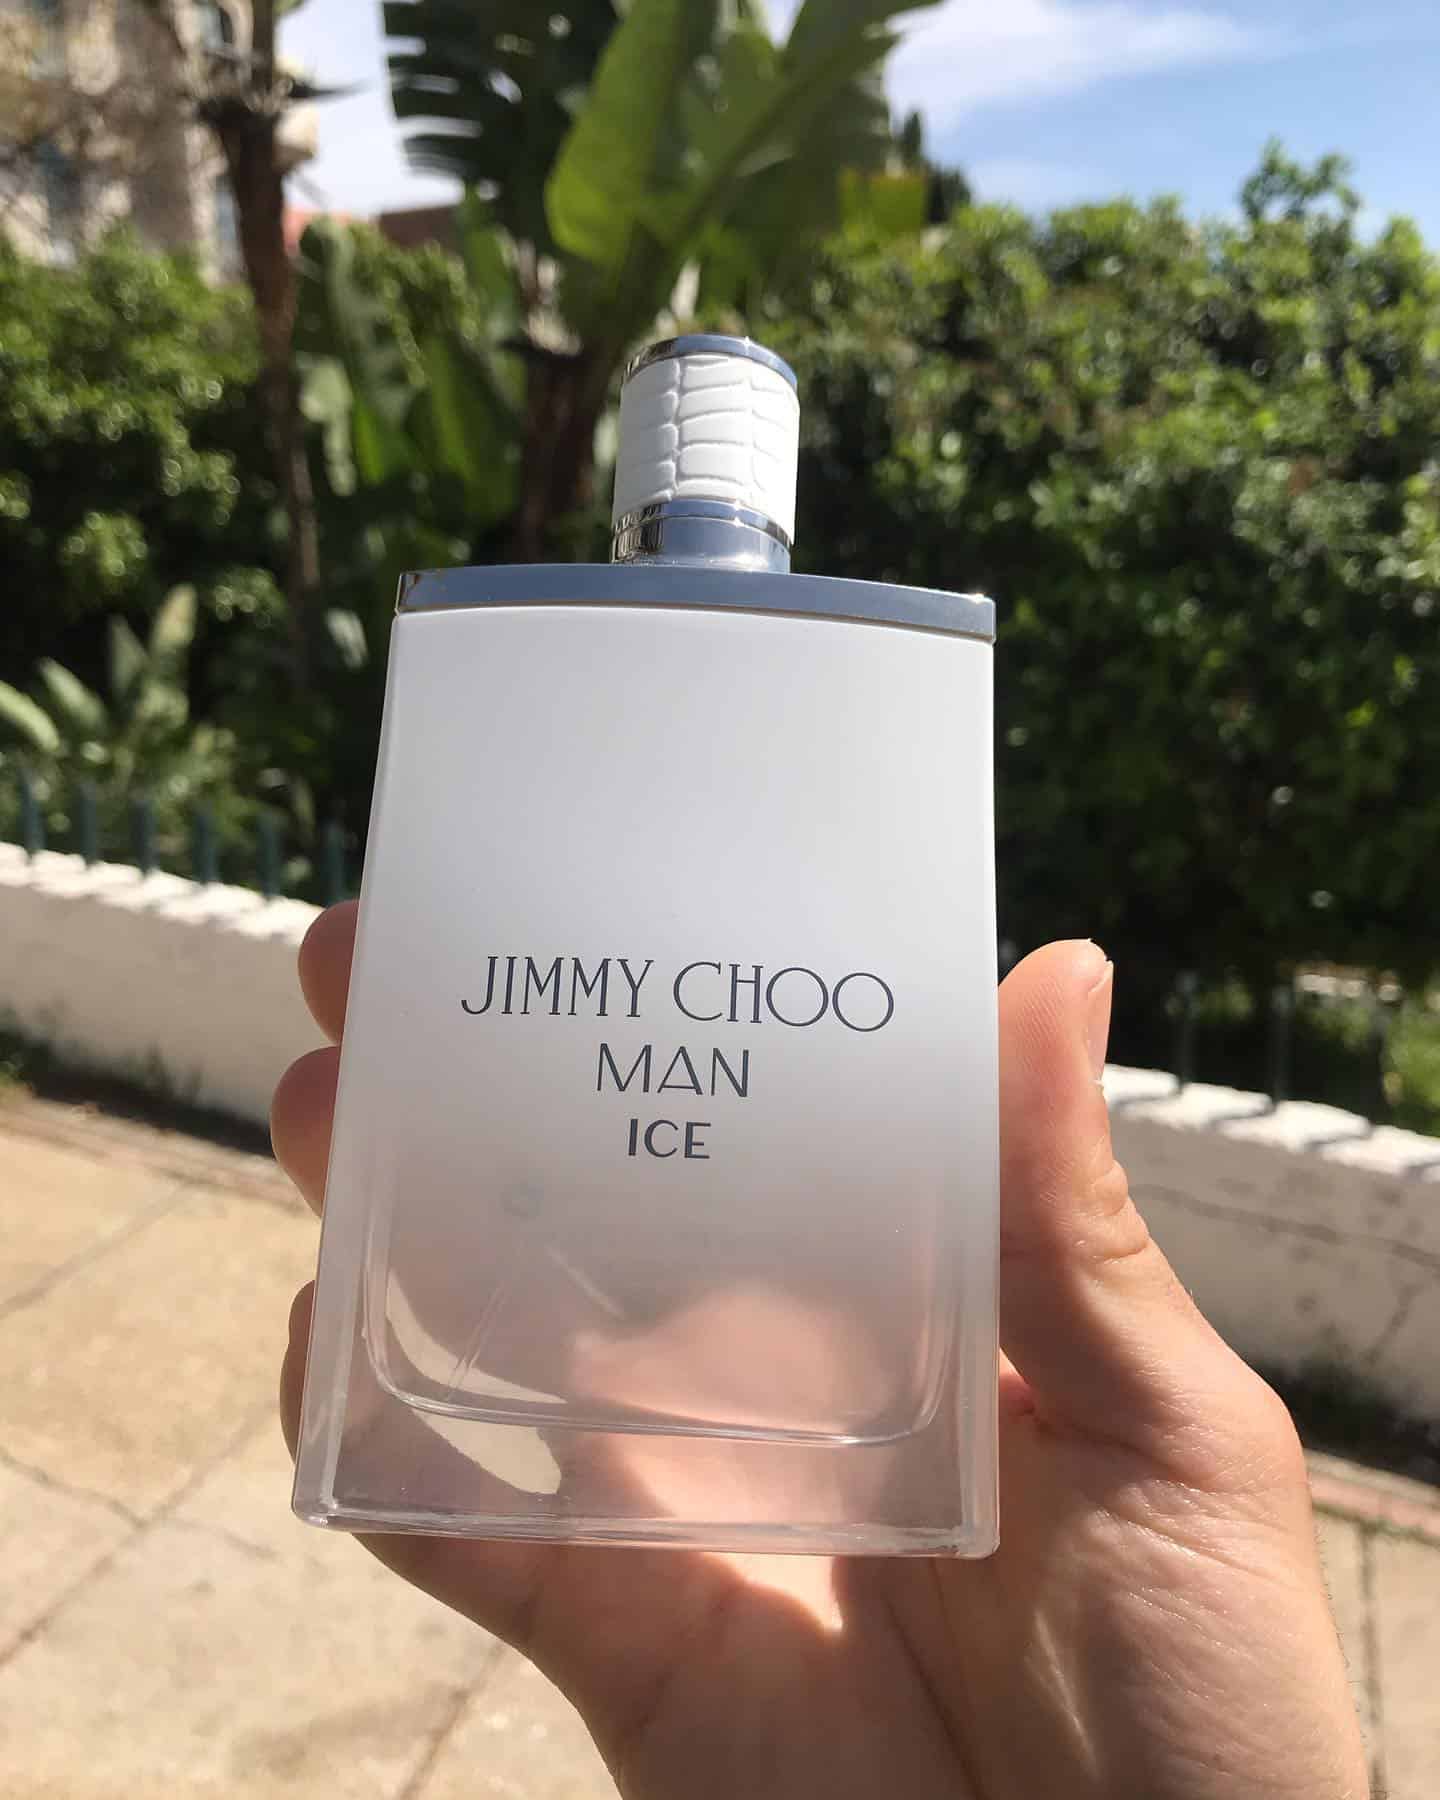 holding a bottle of jimmy choo man ice cologne